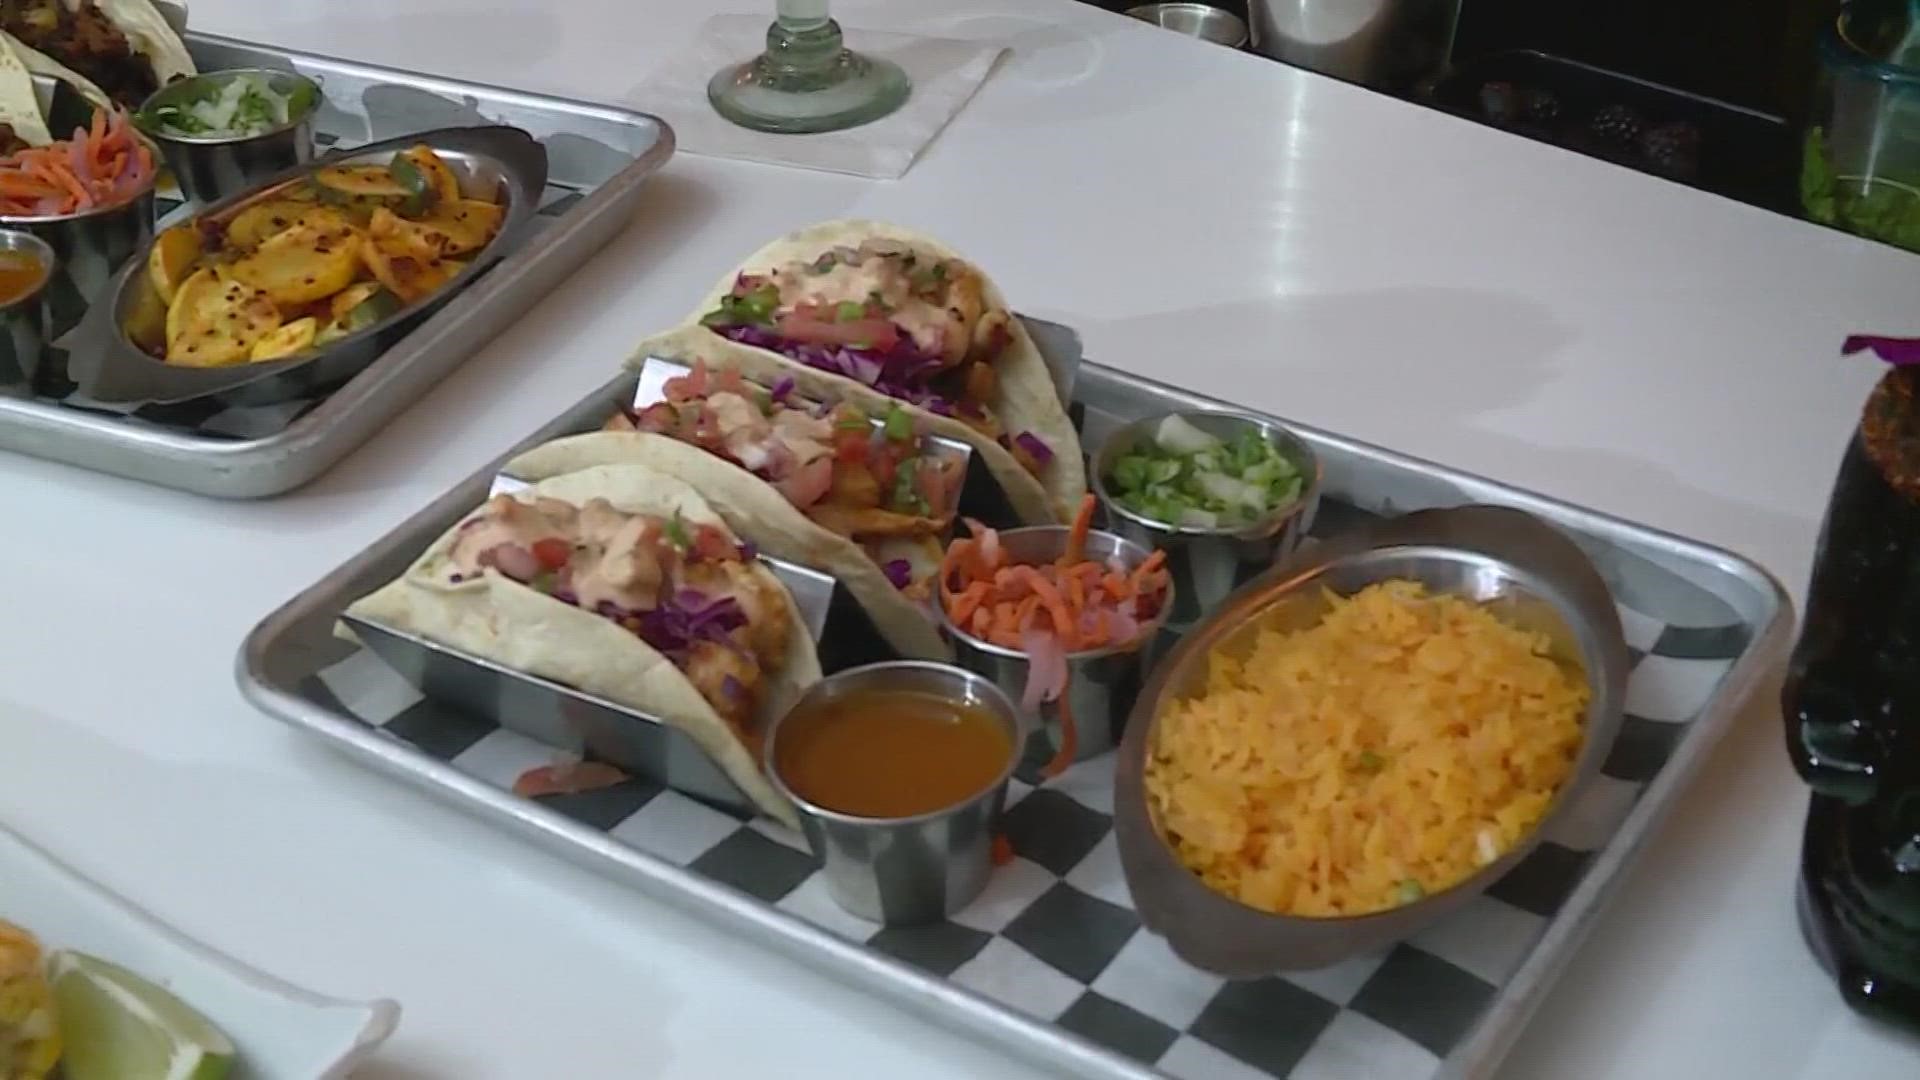 Hungry? You will be! Check out the food being served up at Blue Habanero as we celebrate Cinco de Mayo in Cleveland.